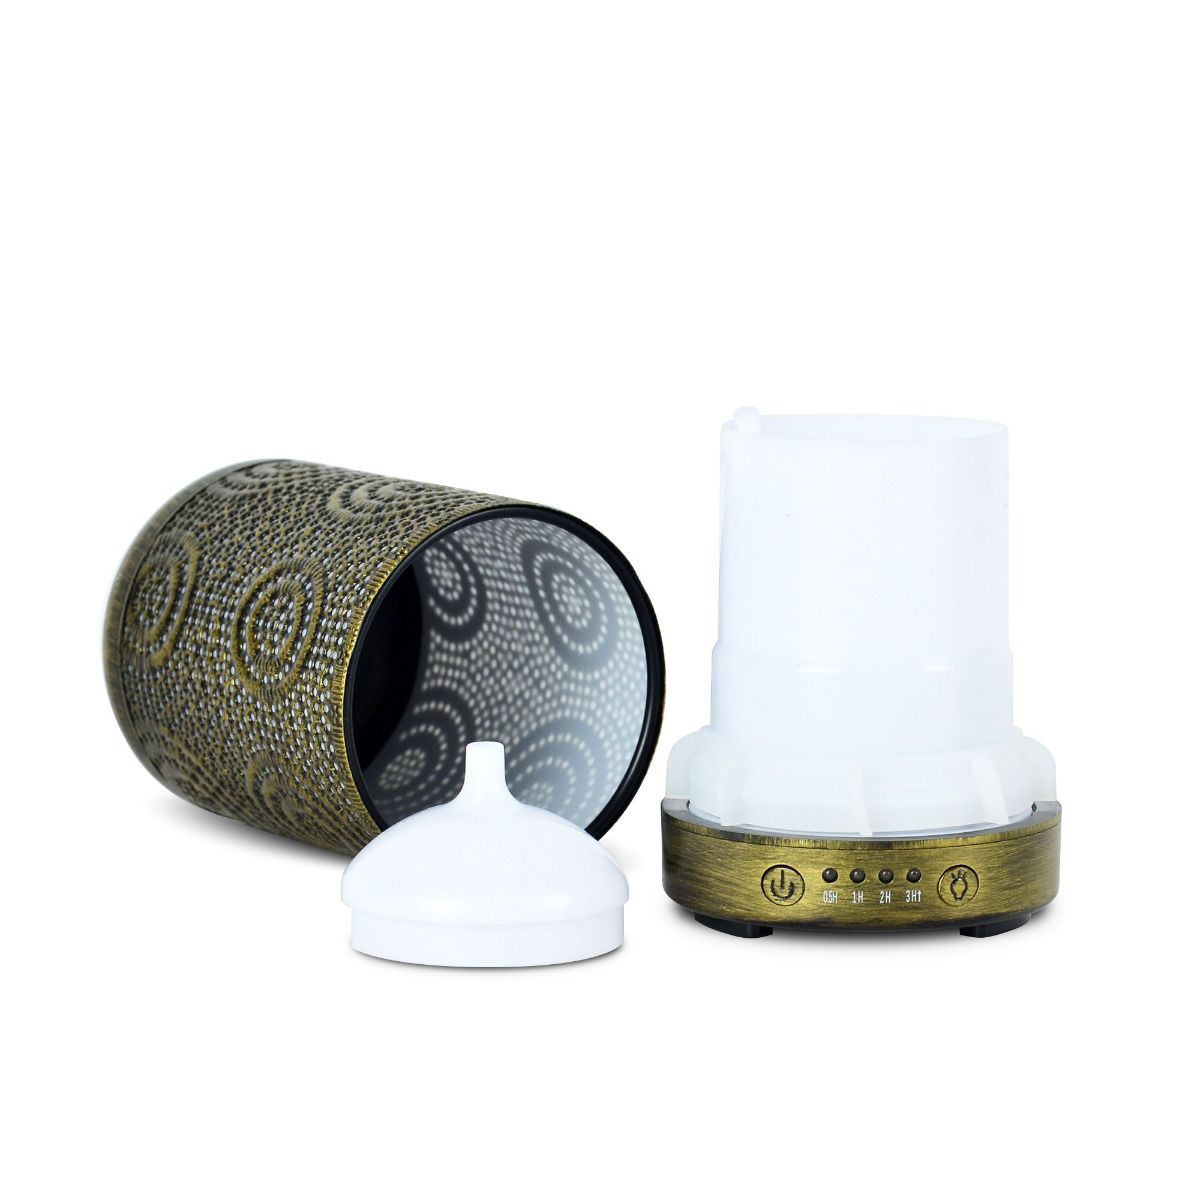 100ml Metal Essential Oil and Aroma Diffuser-Vintage Gold